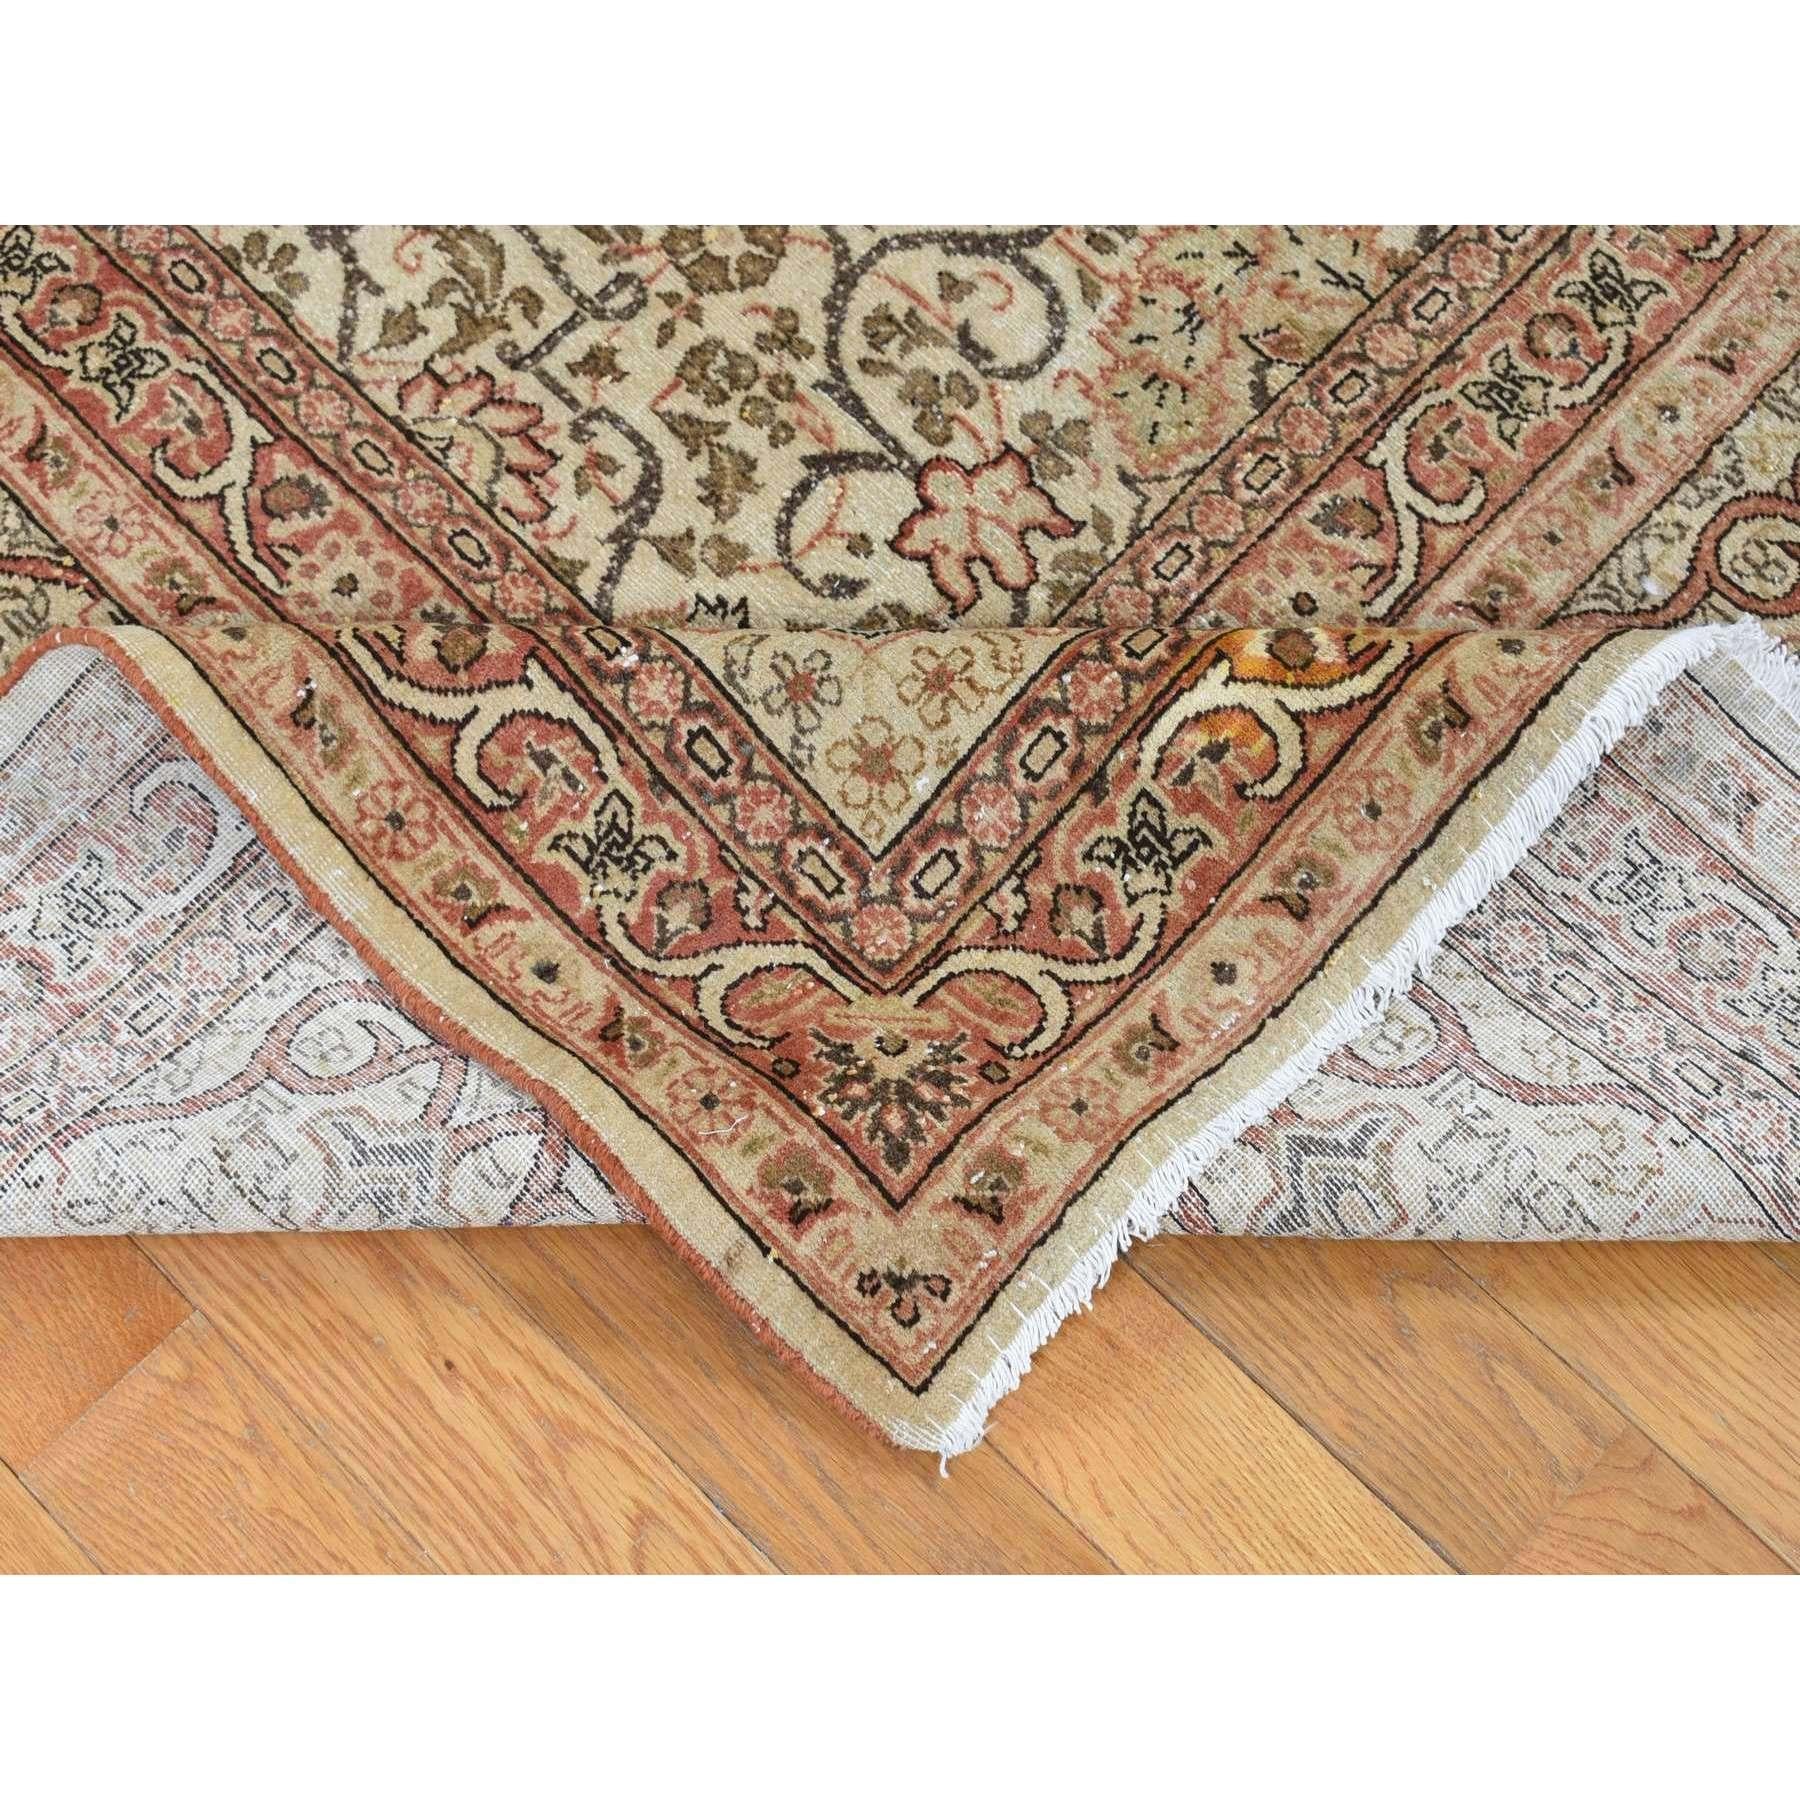 Early 20th Century Beige Antique Persian Tabriz Scroll and Rosettes Design Hand Knotted Wool Rug For Sale